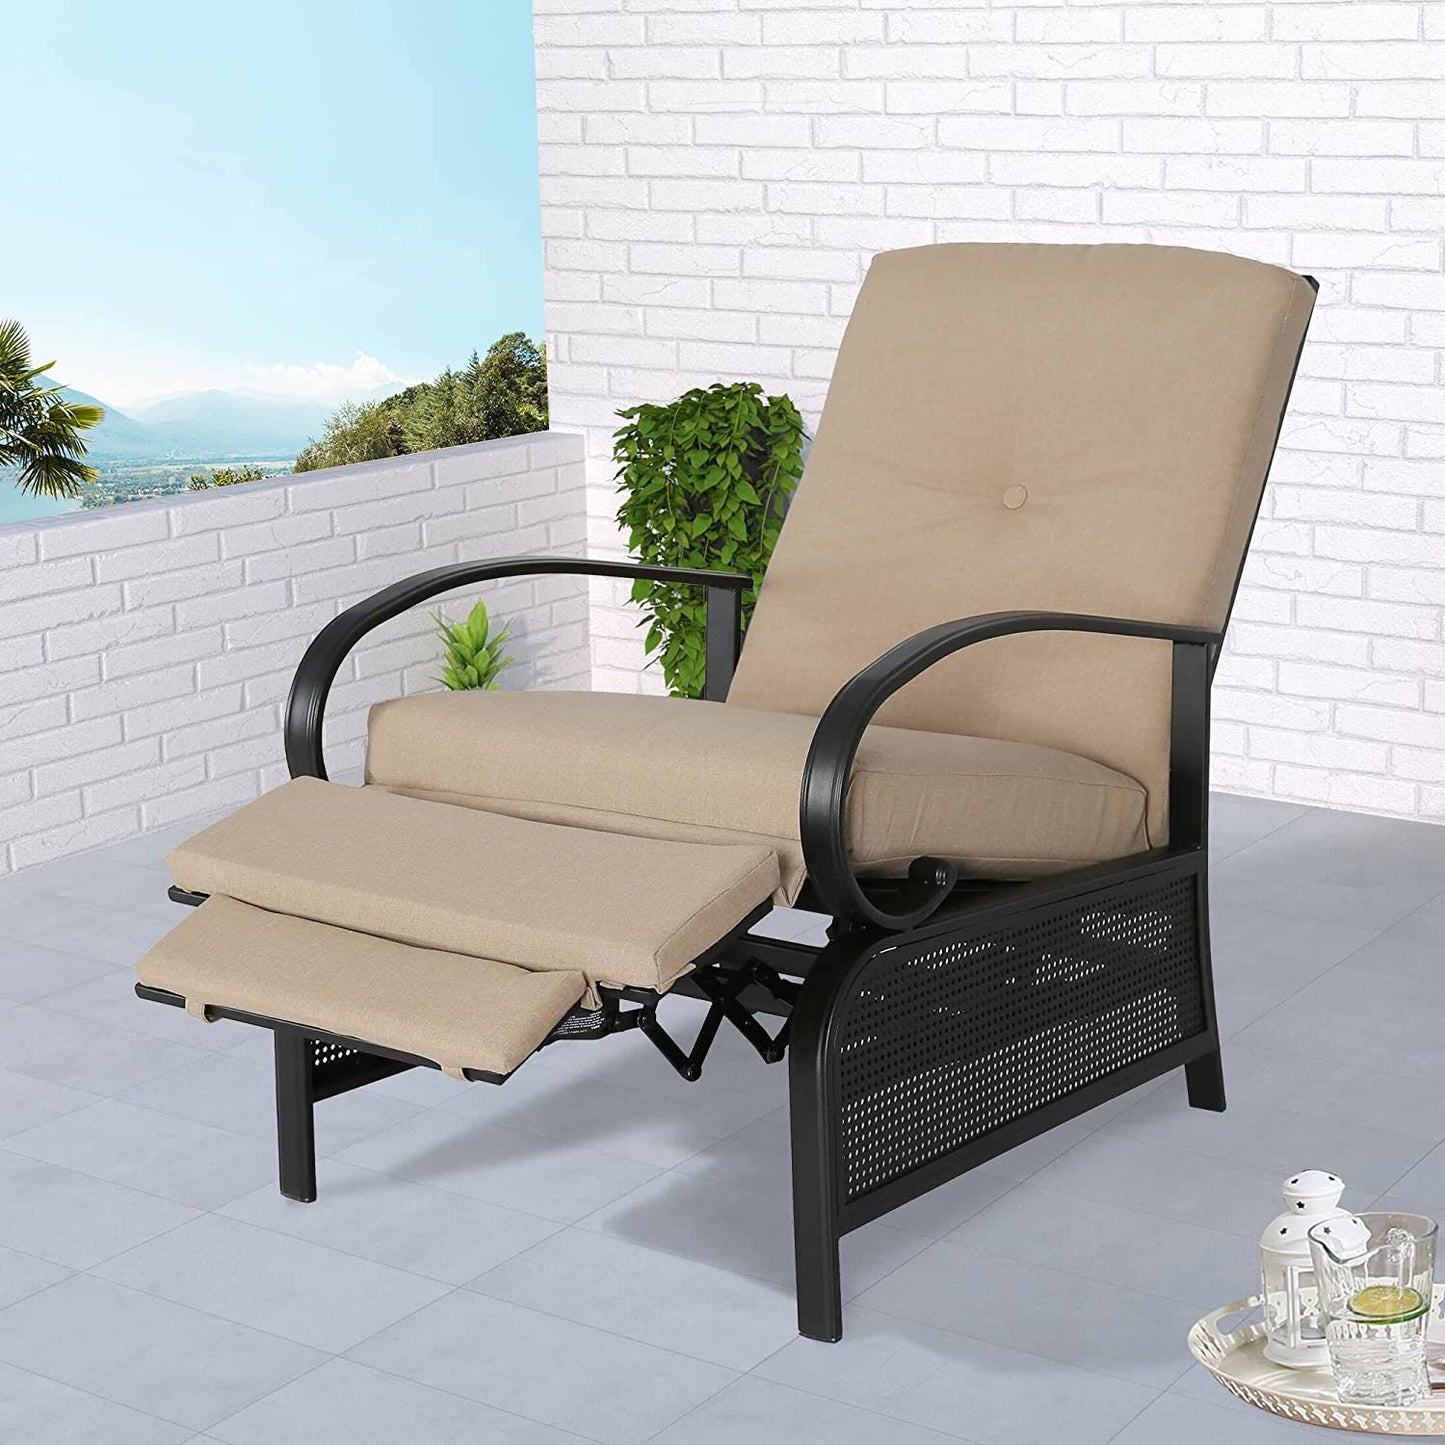 Outdoor Reclining Lounge Chair Automatic Adjustable Patio Lounge Sofa with Comfortable Cushion